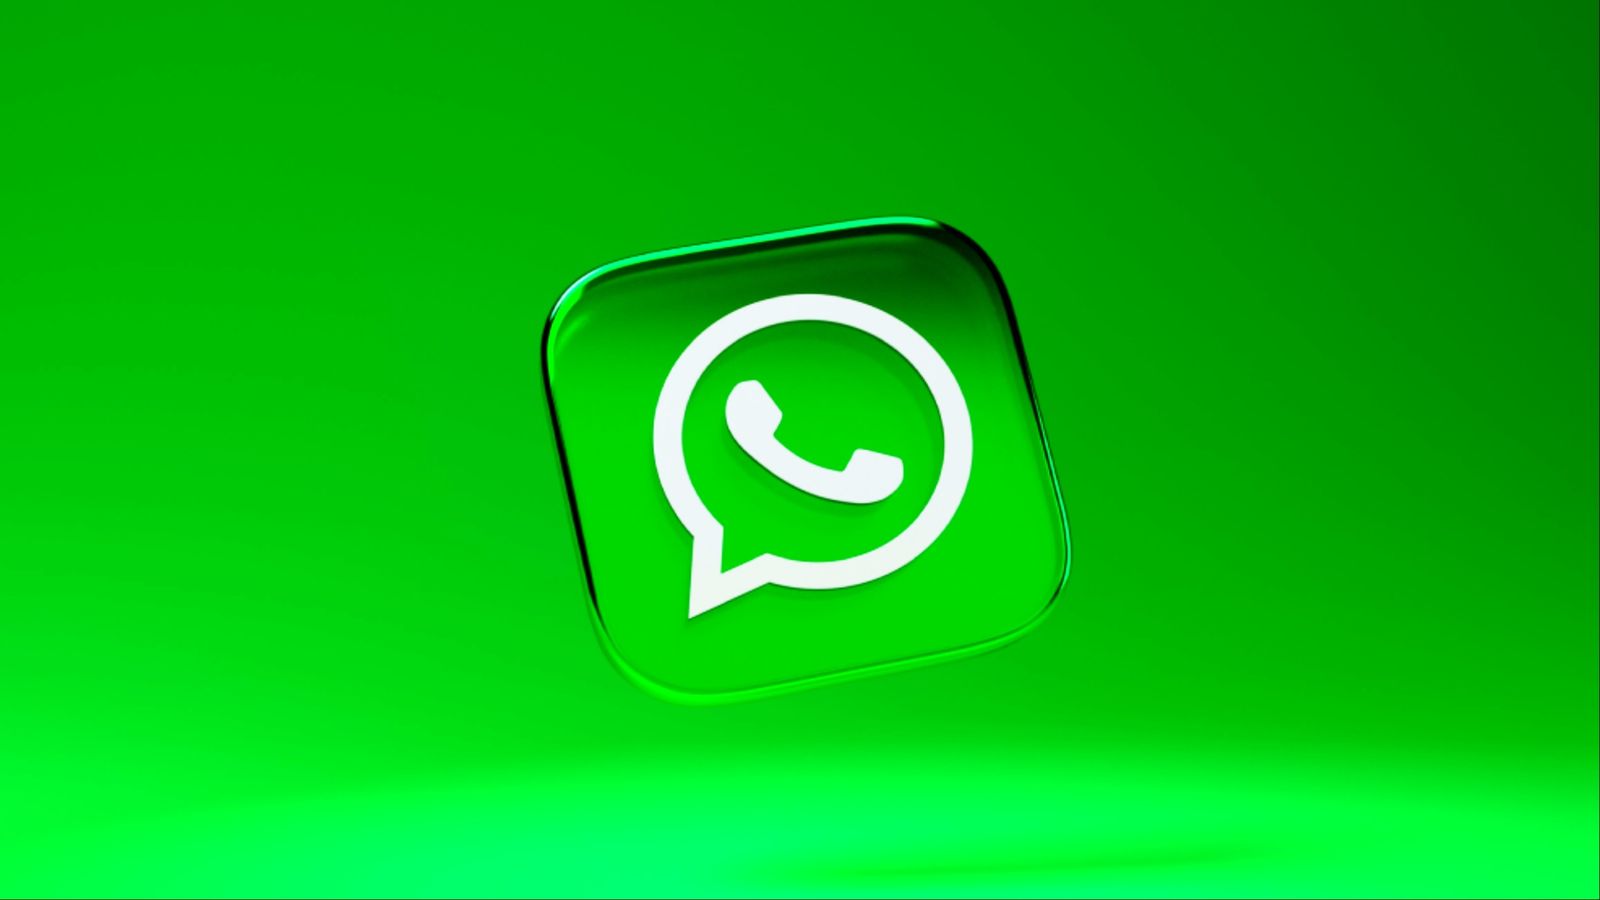 3D WhatsApp logo on a lime green background